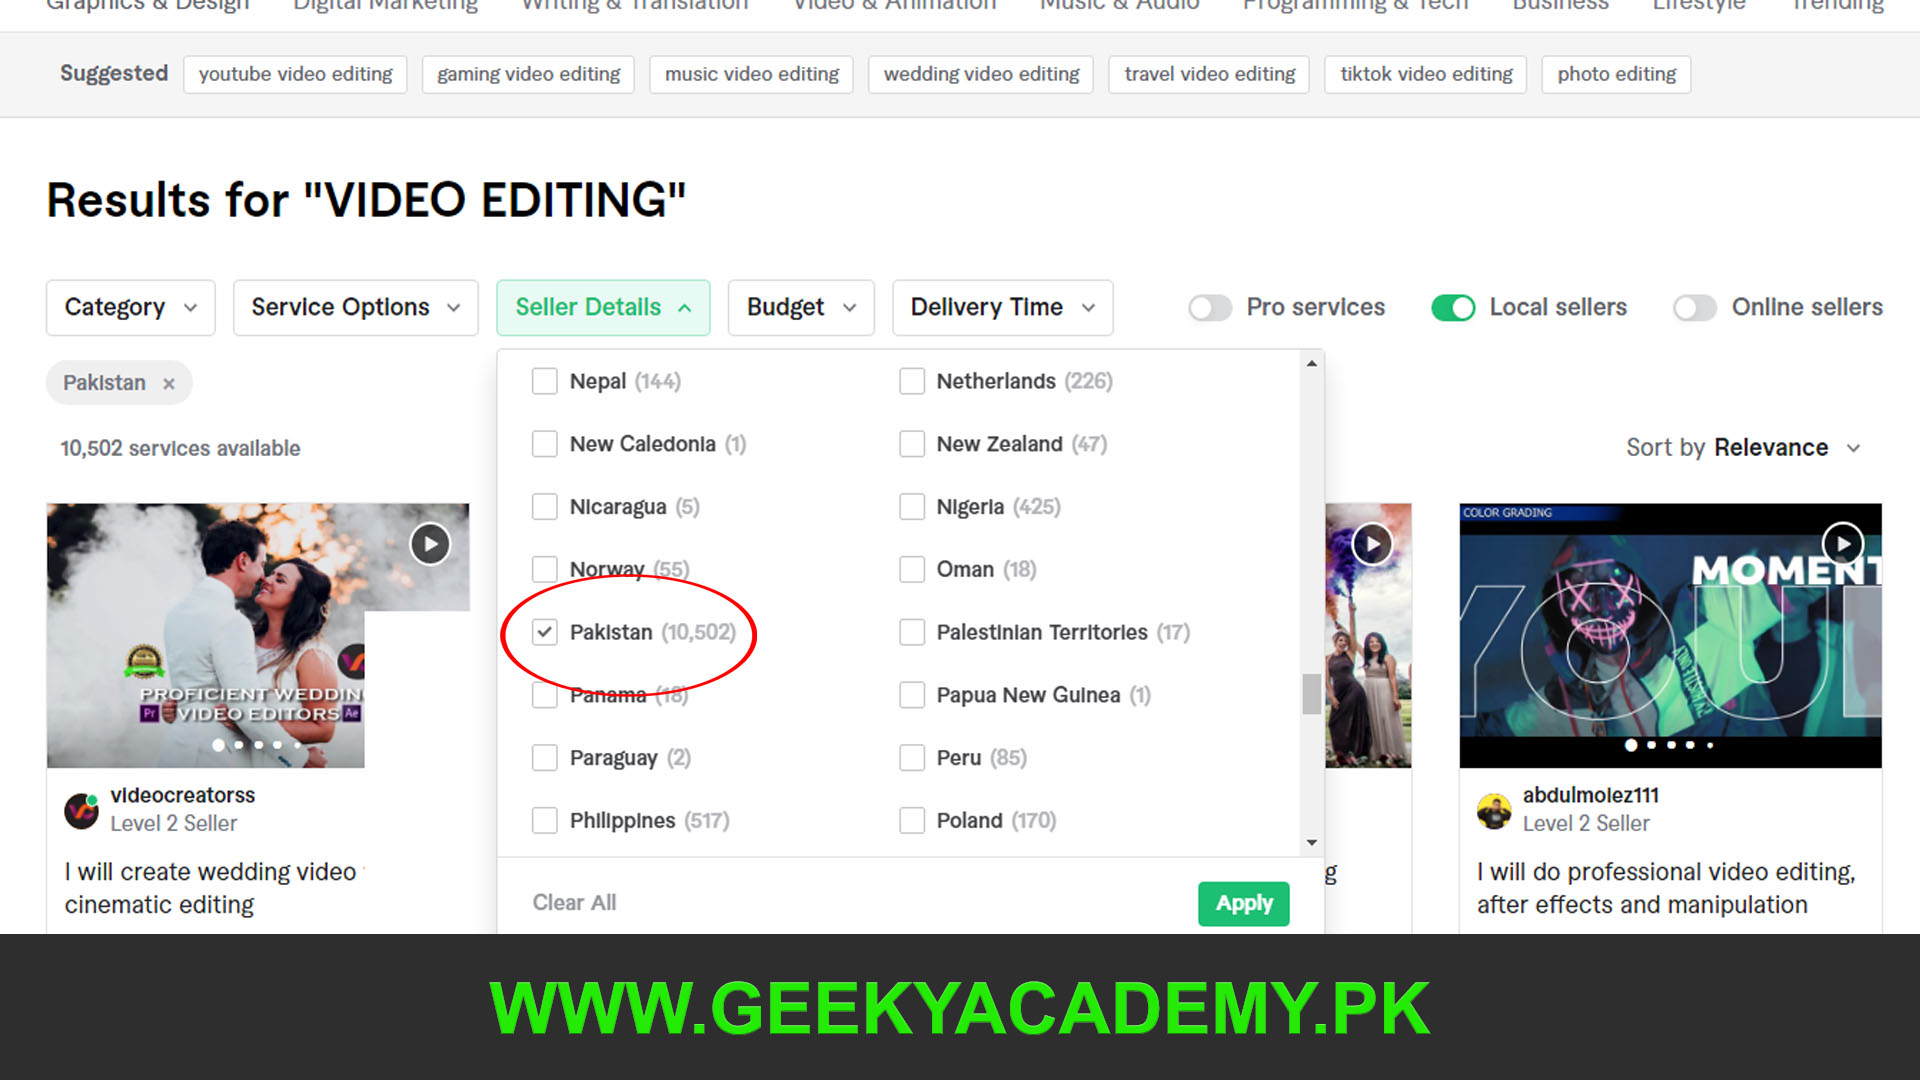 How To Start Freelancing in Pakistan With No Experience in Video Editing, GeekyAcademy